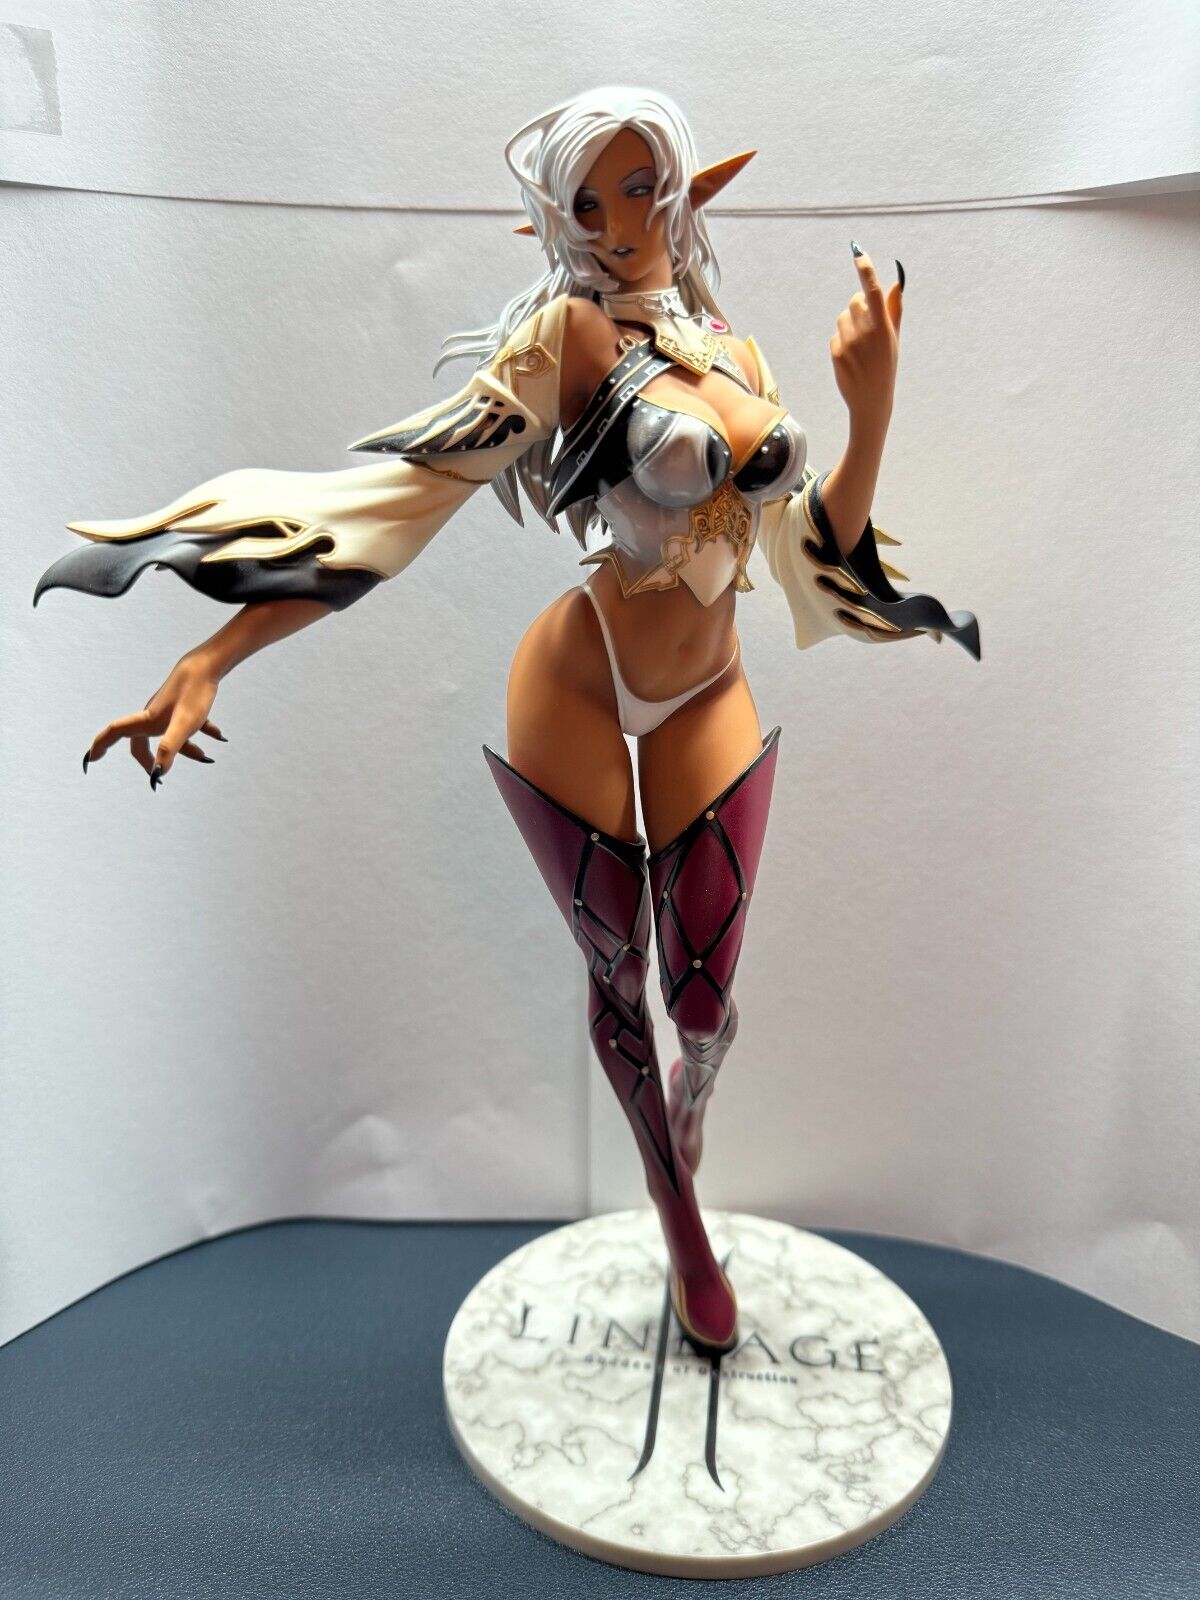 Lineage II Dark Elf Brown Version Max Factory Rare Limited Edition 1/7 Scale Use